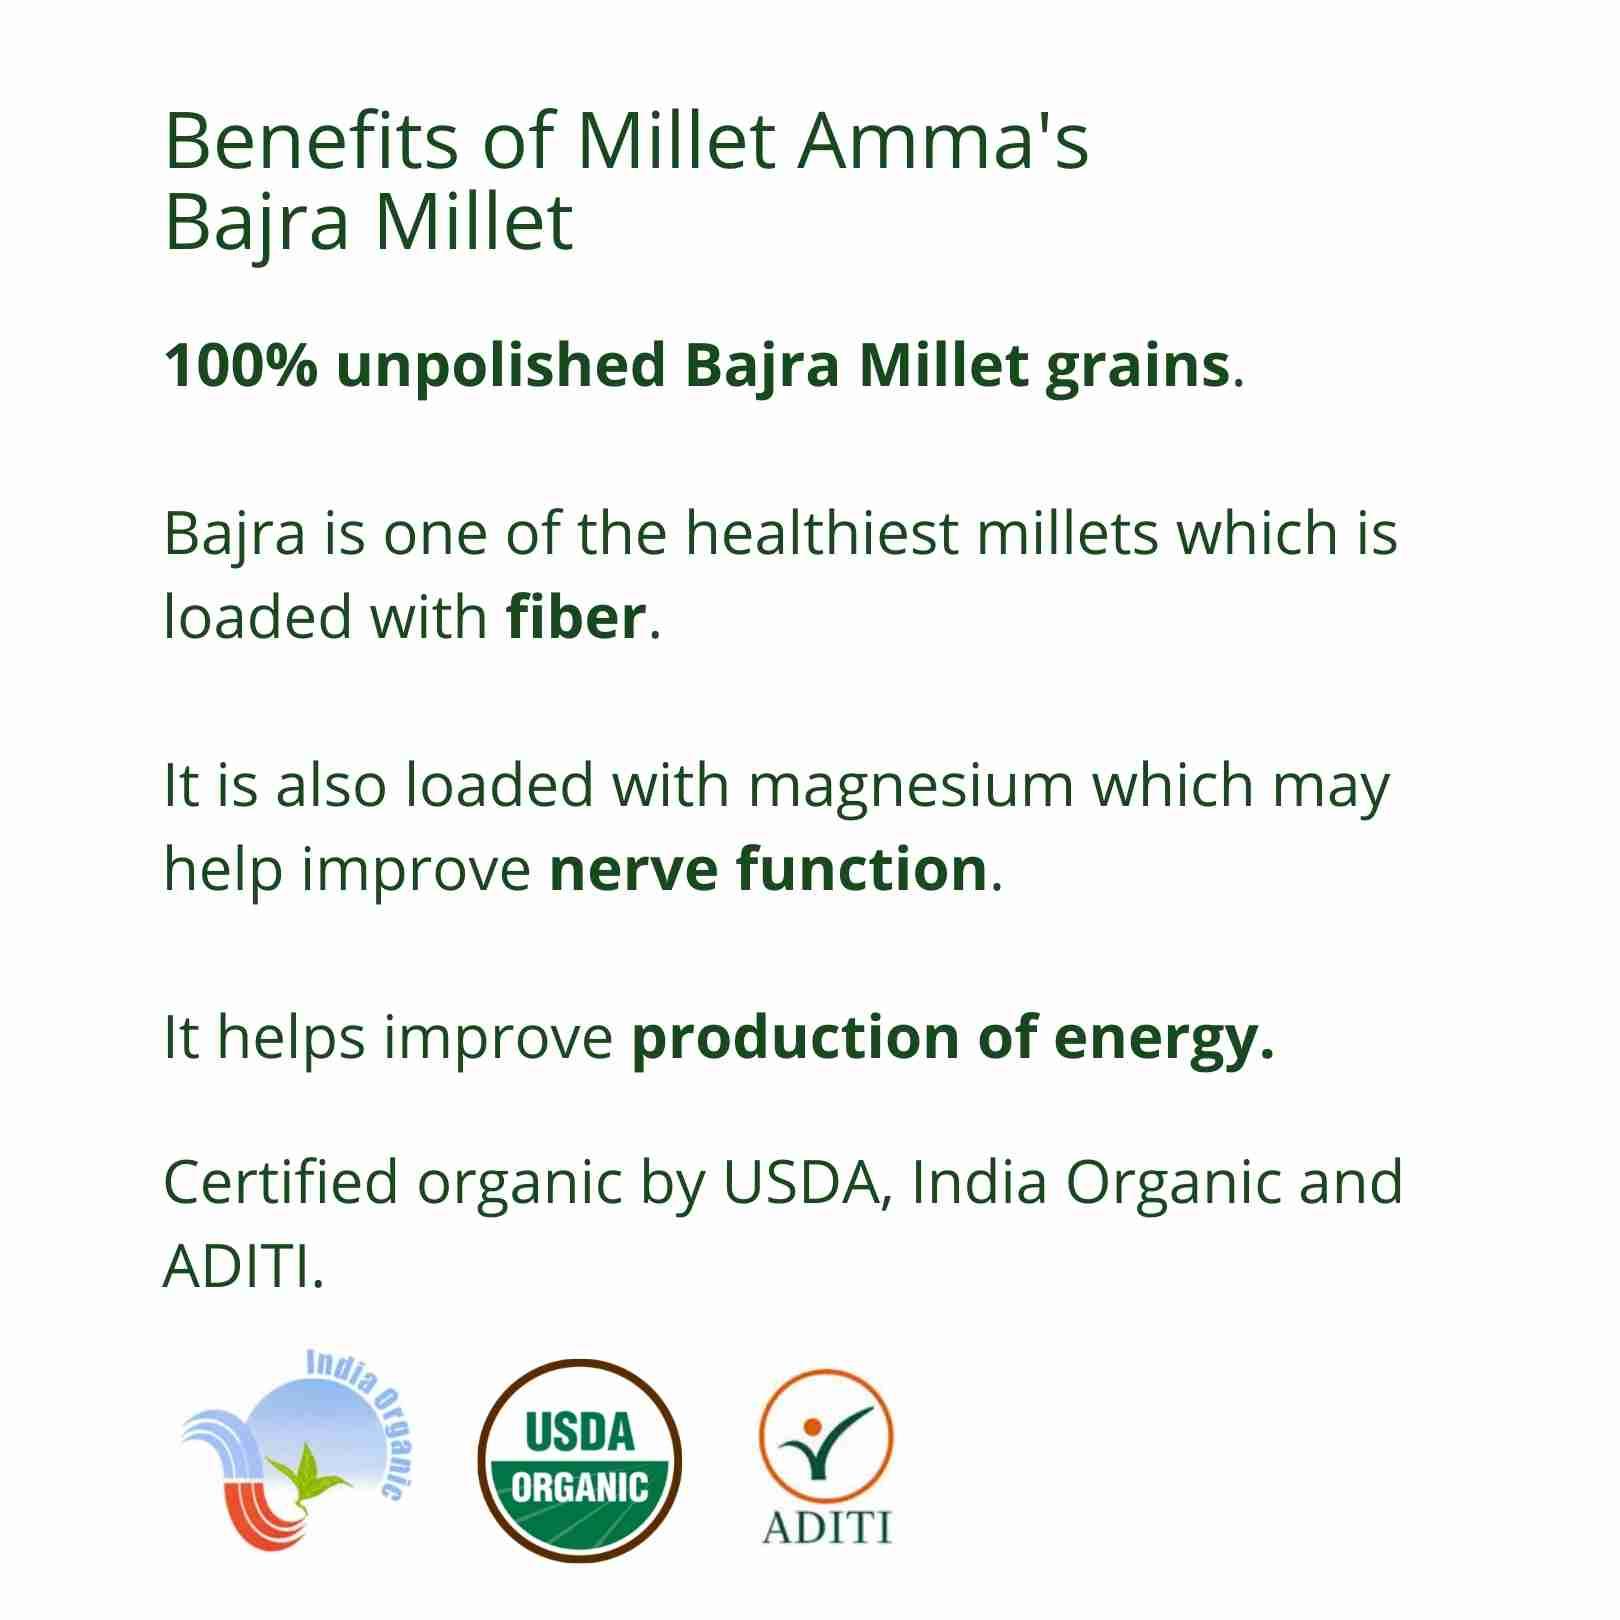 Millet Amma’s Organic Bajra Millet Grains- Millet Amma’s Organic Bajra(Pearl) Millet Grains are rich in magnesium which aids in better nervous function and energy production.  Unpolished Bajra Millets are a source of potassium and fiber. Potassium is one of the most important minerals required for the body.  You can make a variety of dishes with our Gluten-free Bajra Millet Grains like khichdi, idli, dosa, pancakes, cake and rotis.